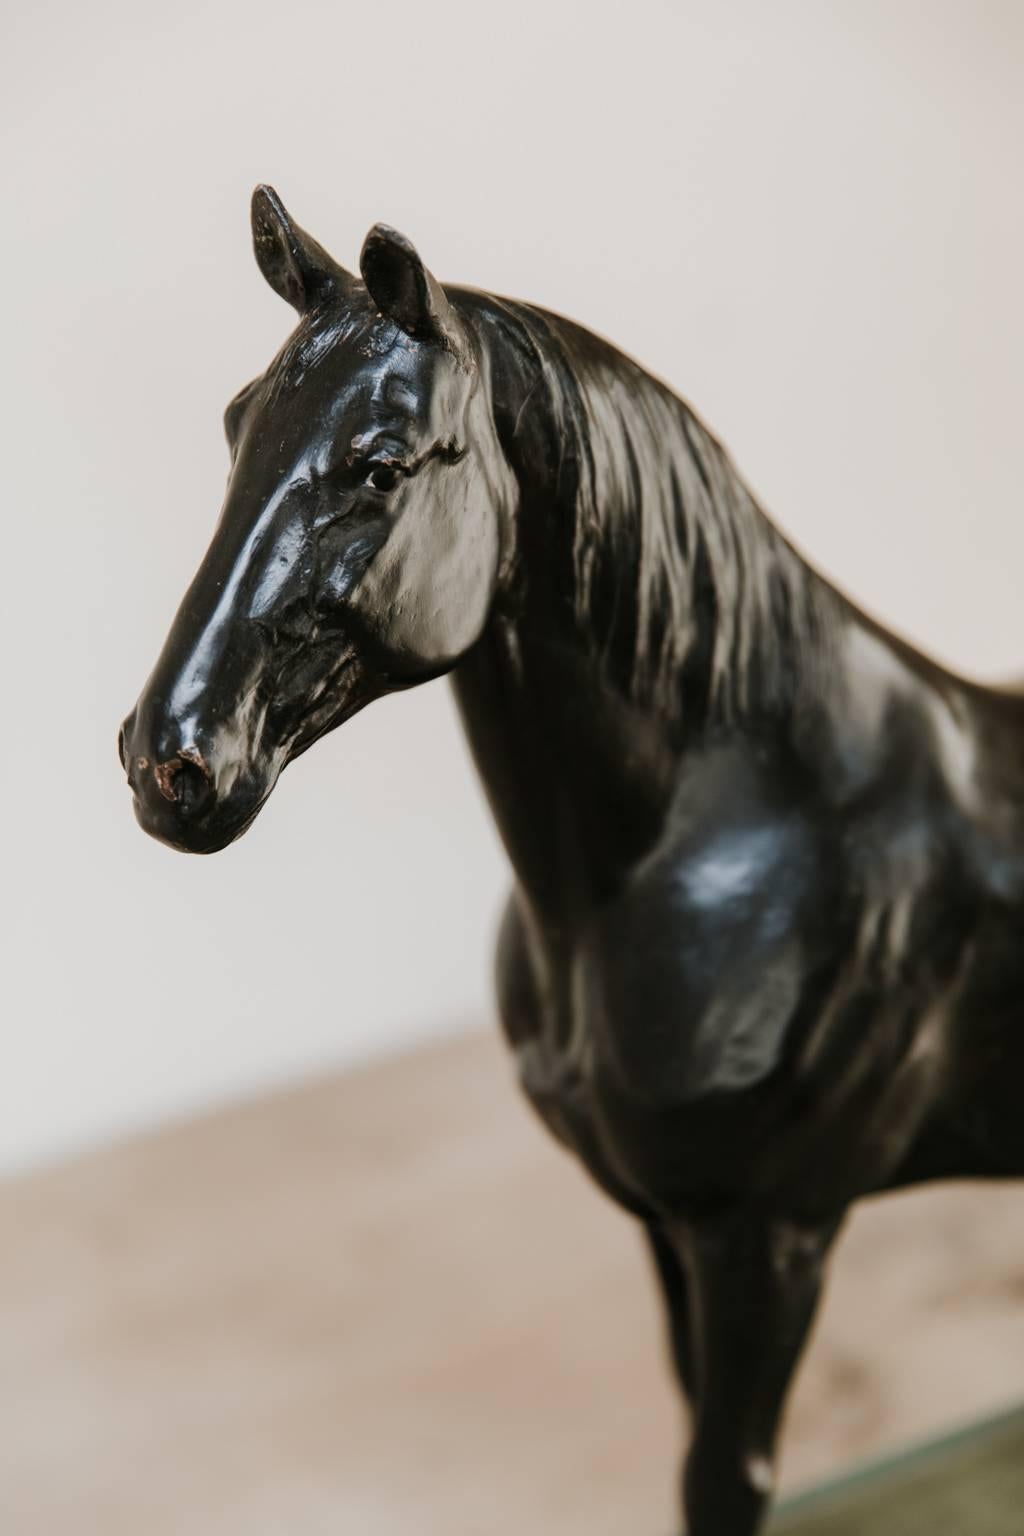 This is a plaster statue of a horse, mounted on wooden base, elegant and strong, wonderful object for every horse lover.